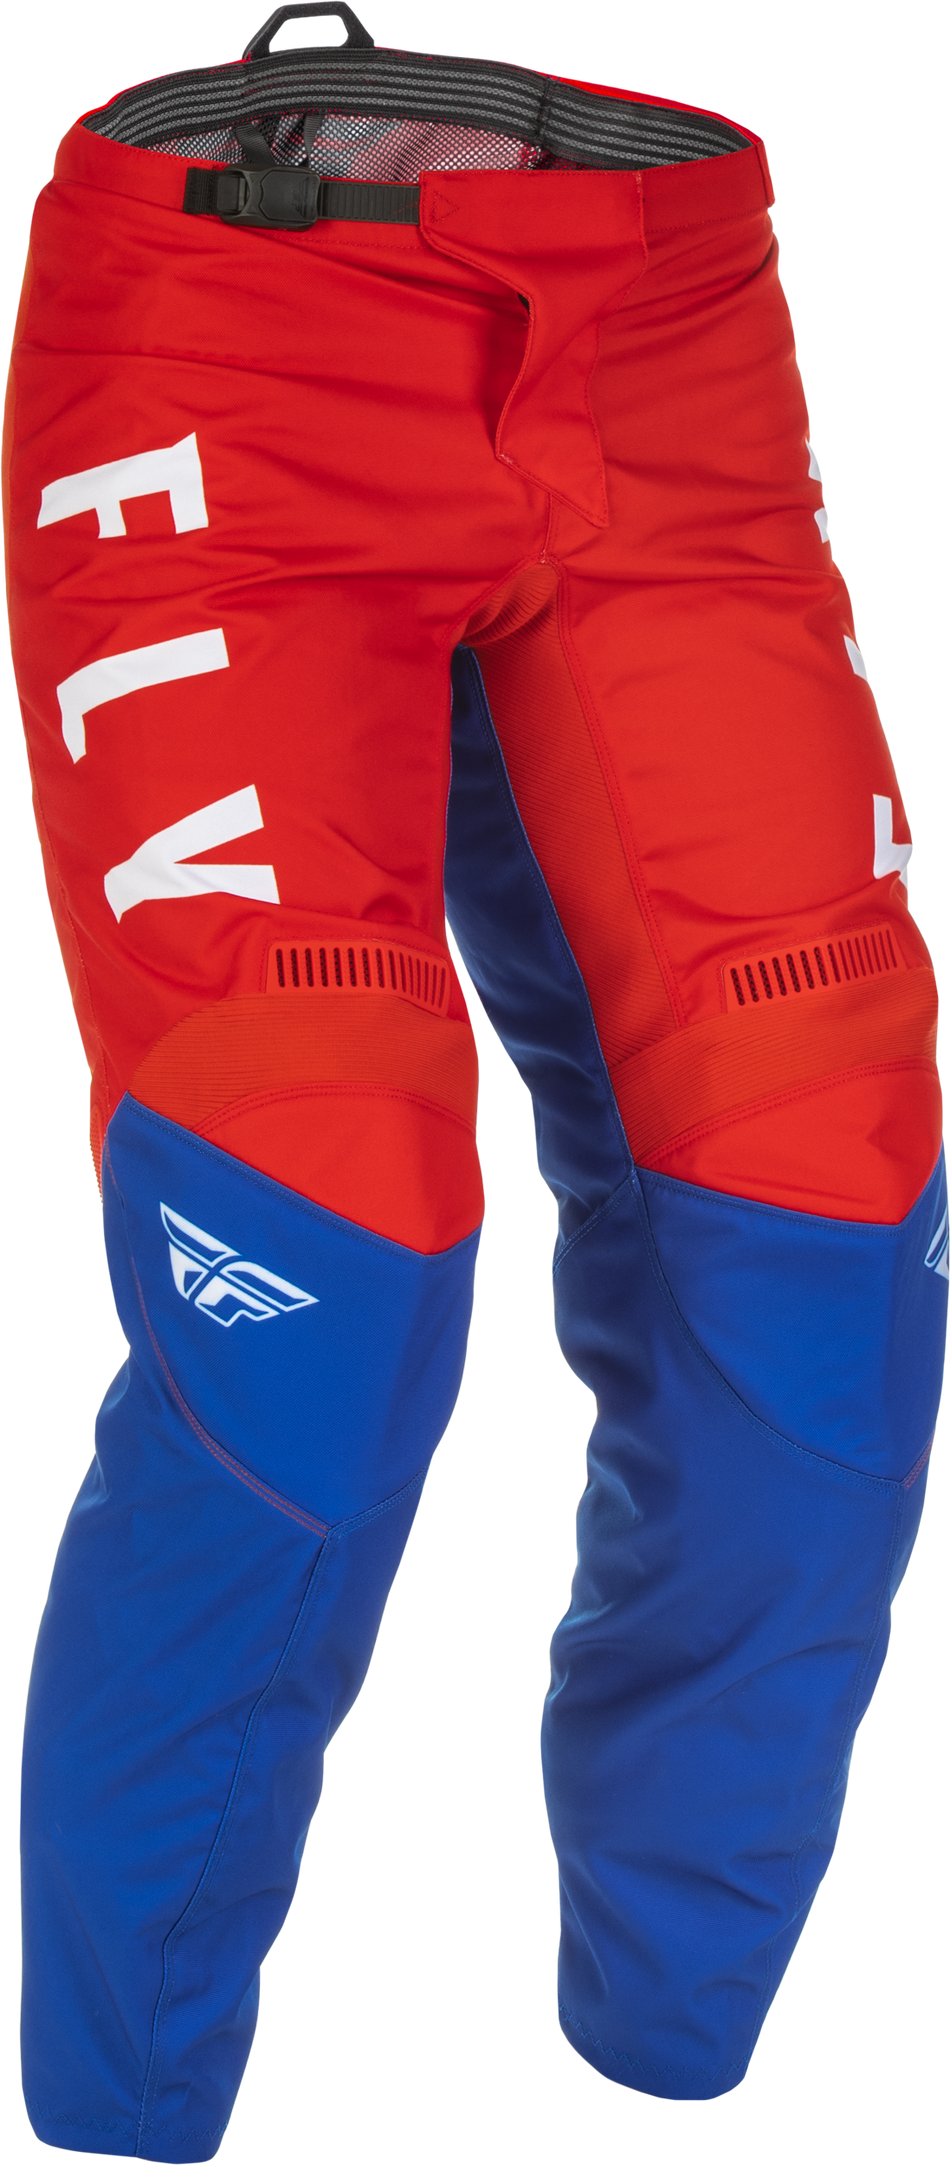 FLY RACING F-16 Pants Red/White/Blue Sz 30 375-93430